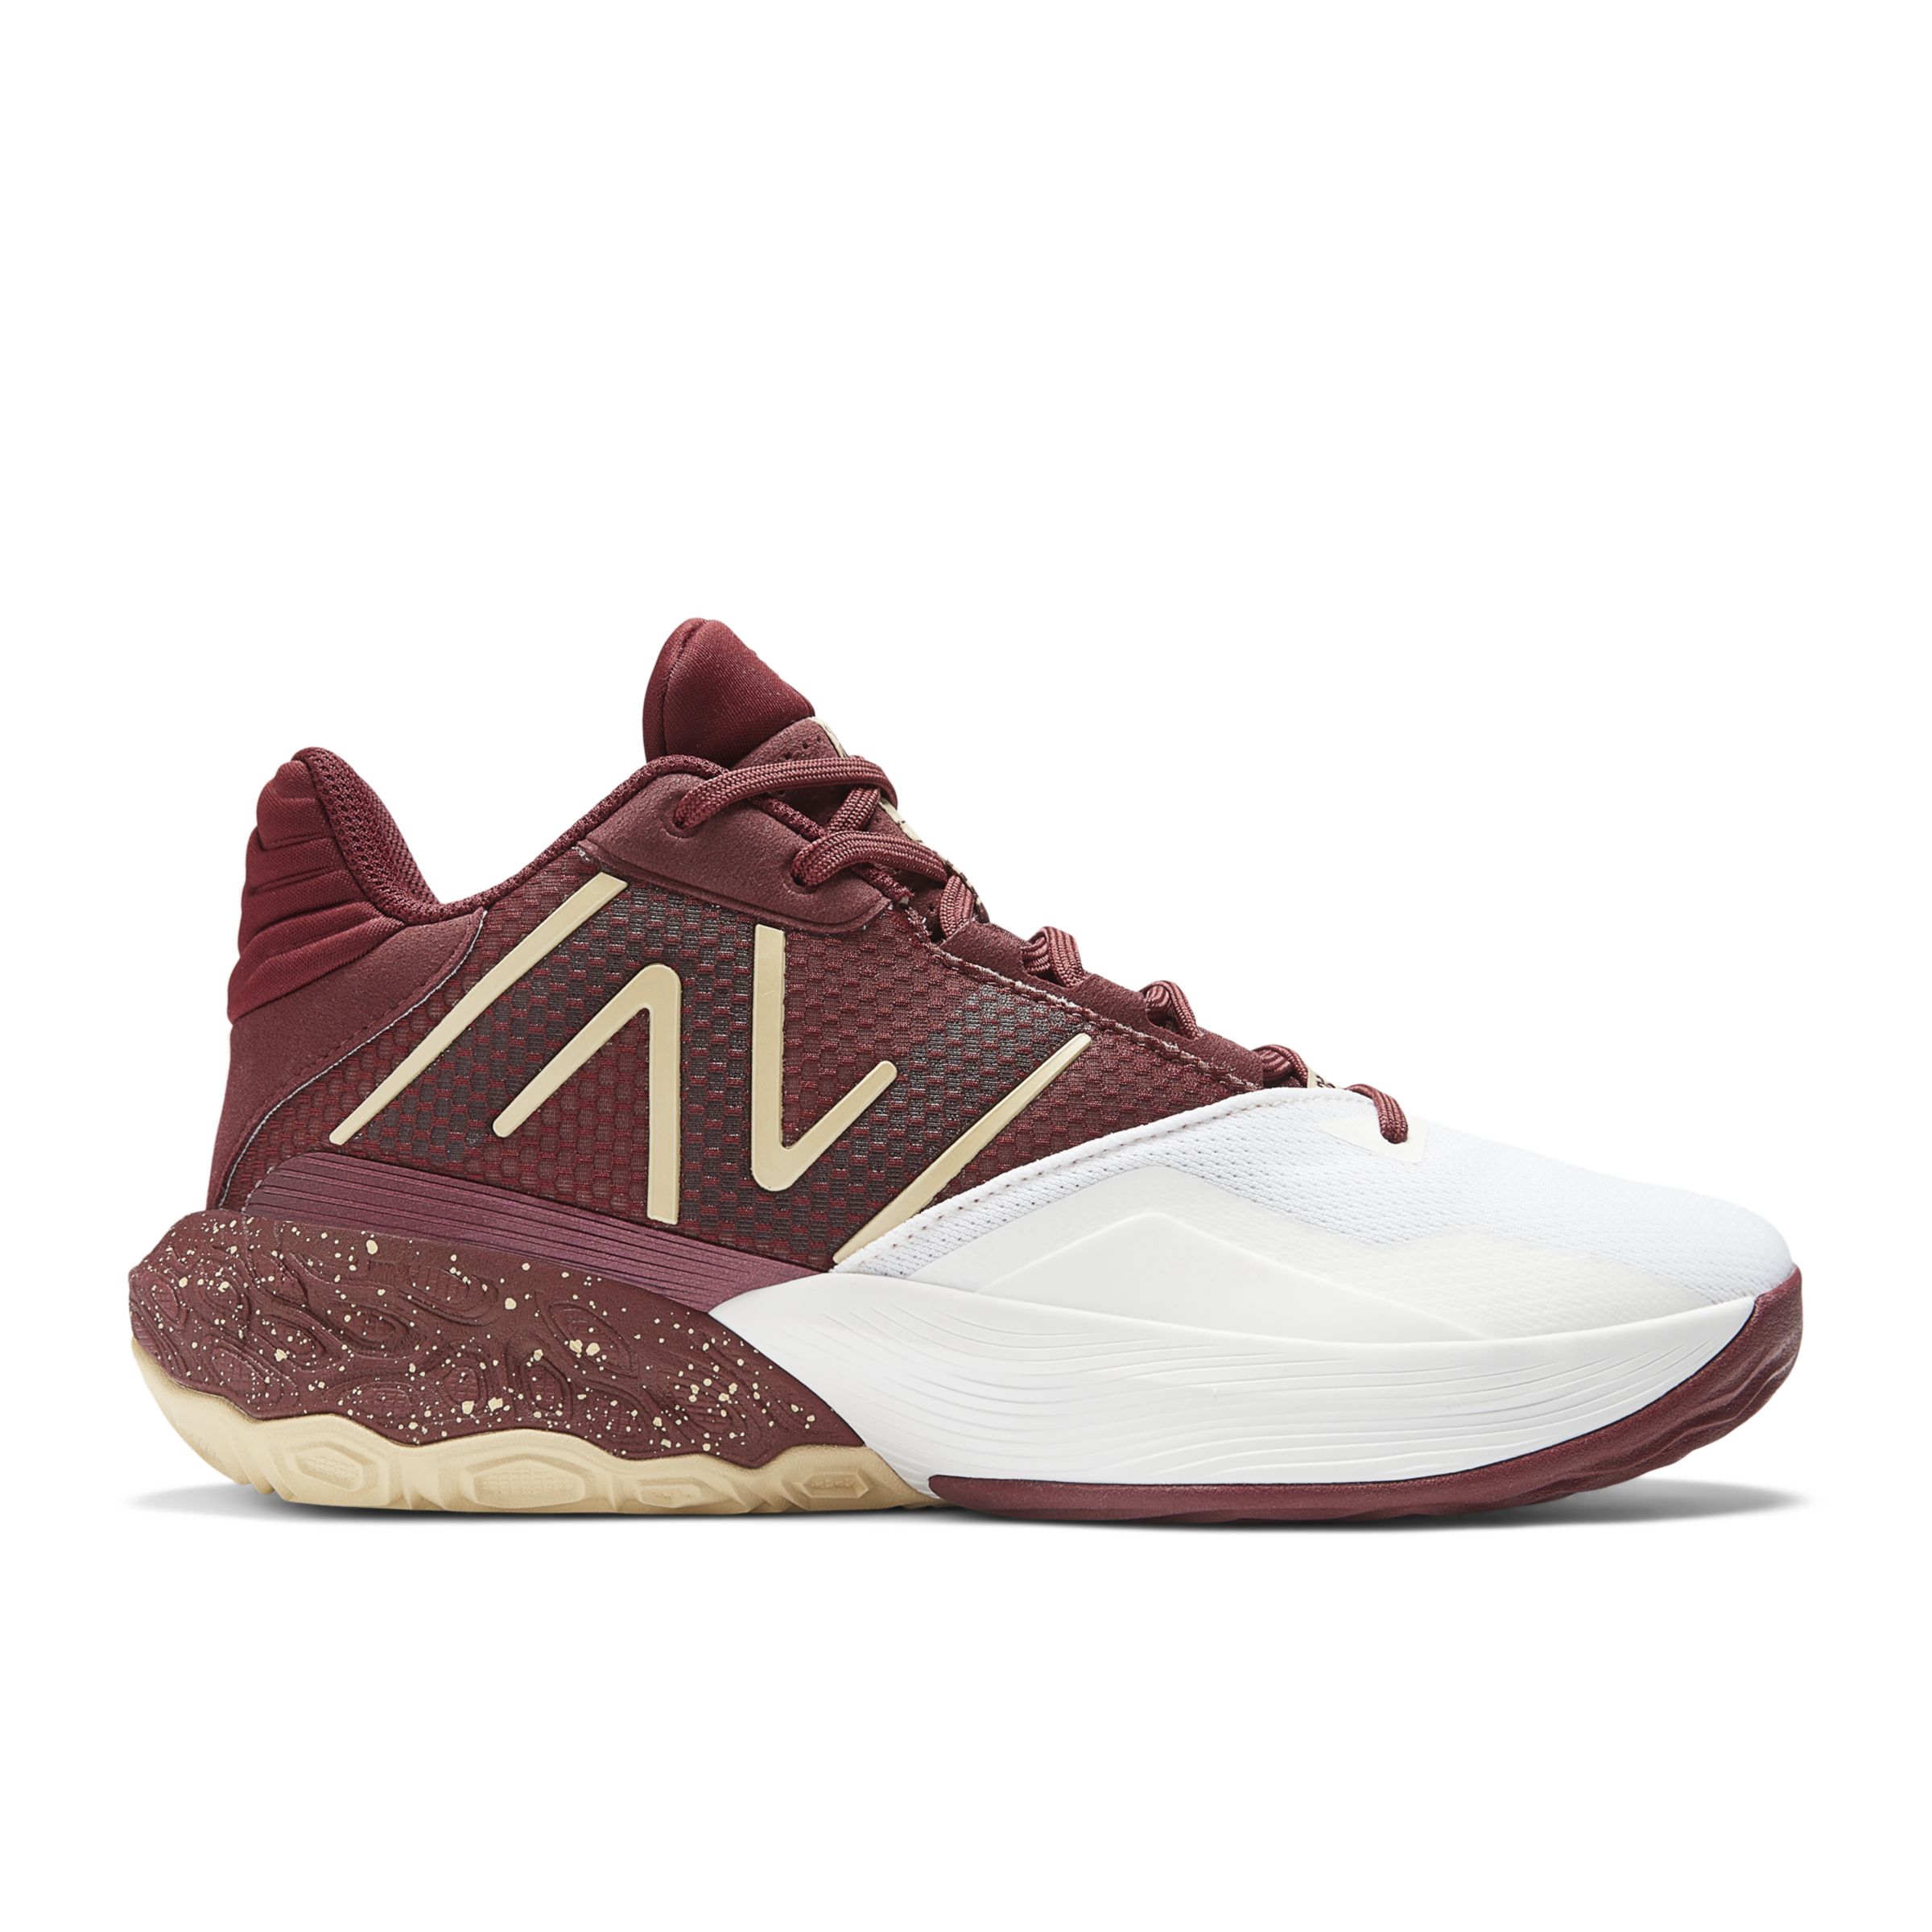 The New Balance TWO WXY v3 Has the Whole Court Covered